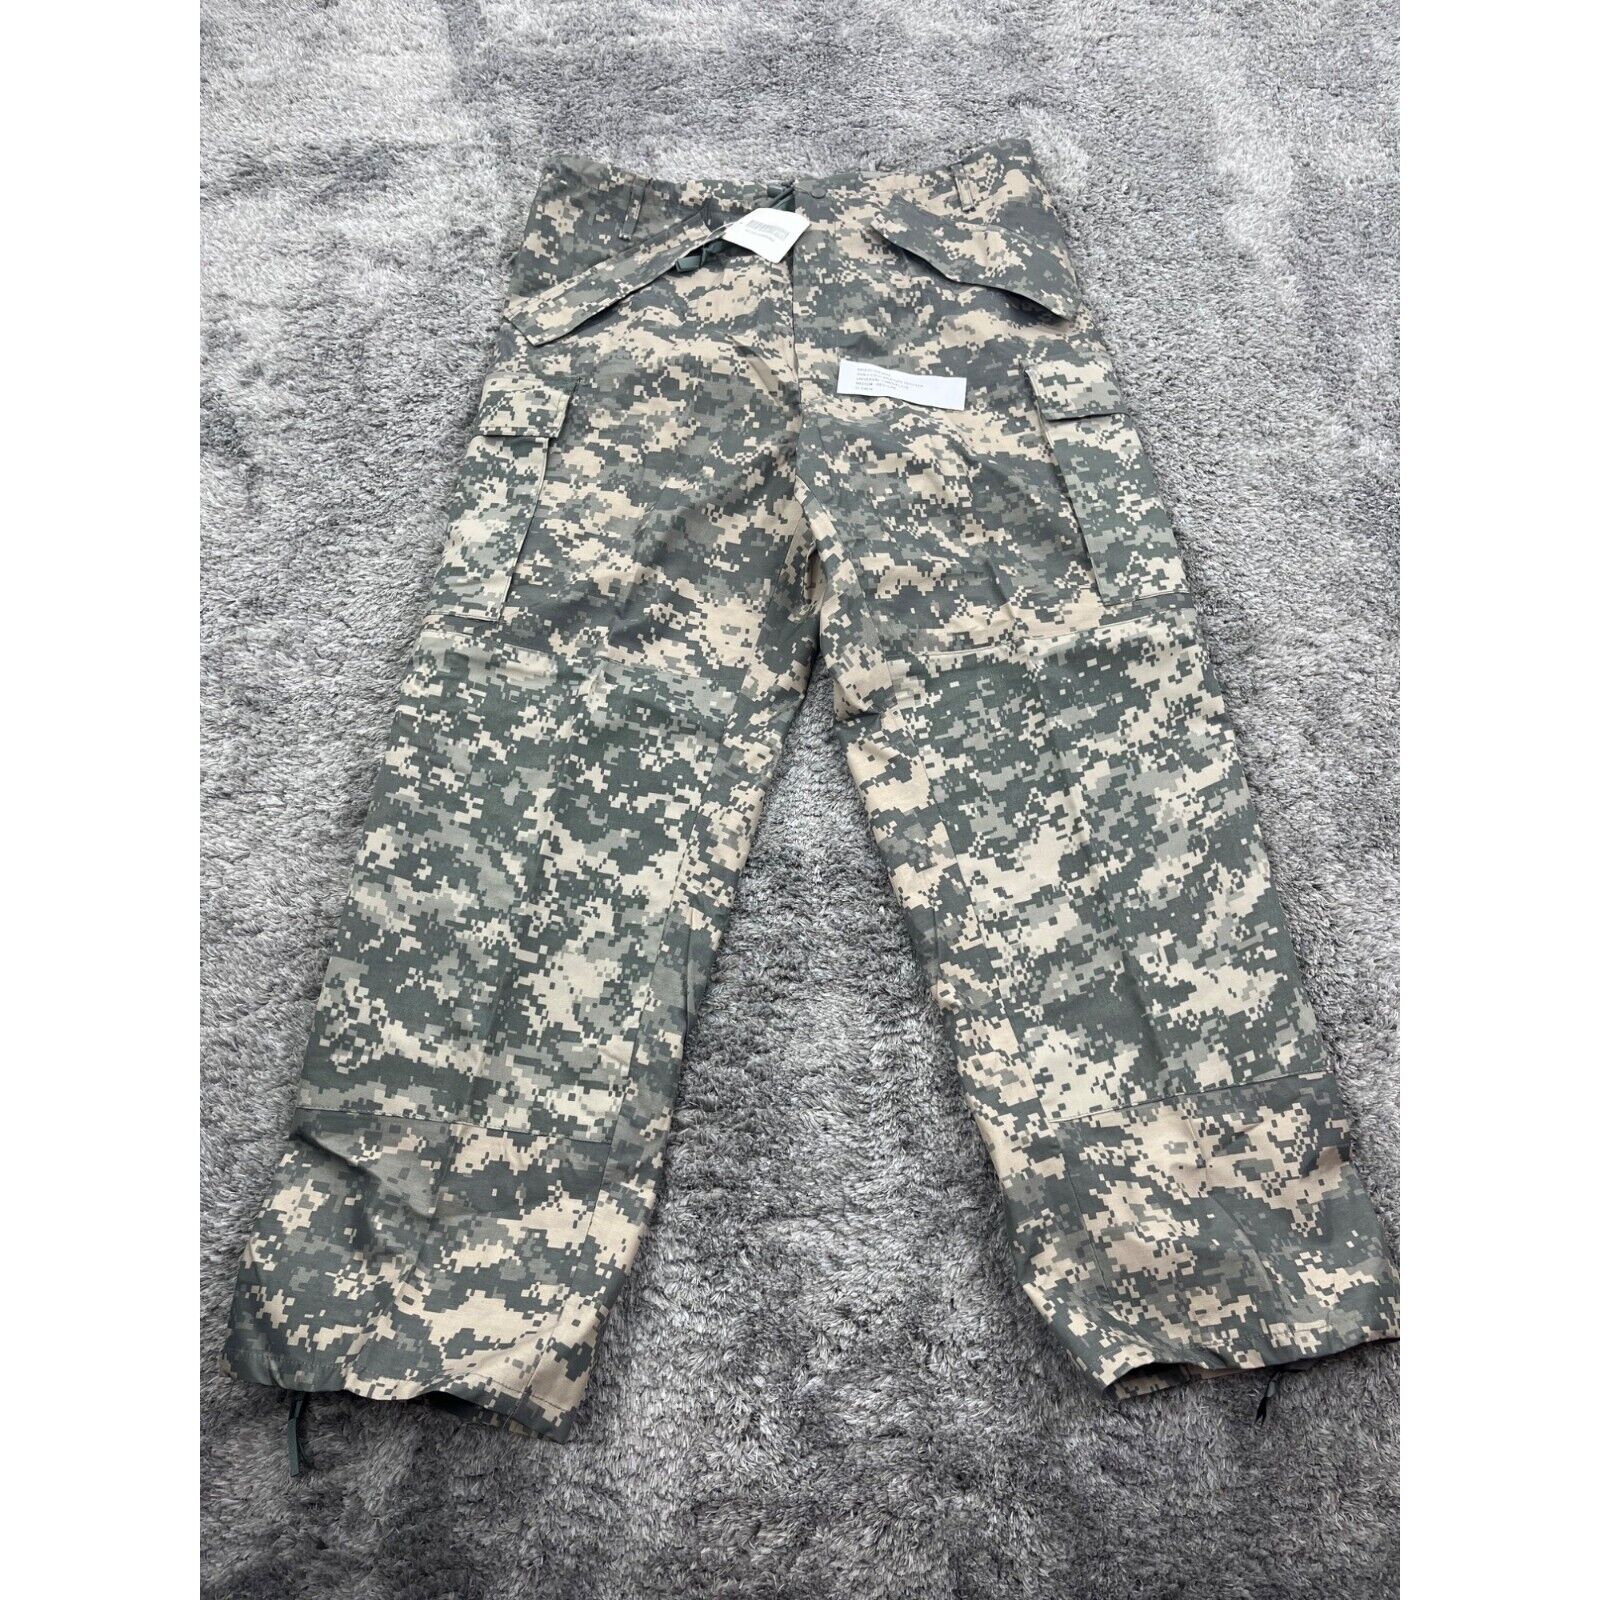 Army Cold Weather Trousers Universal Camouflage Gen II Digital Camo Cargo NWT